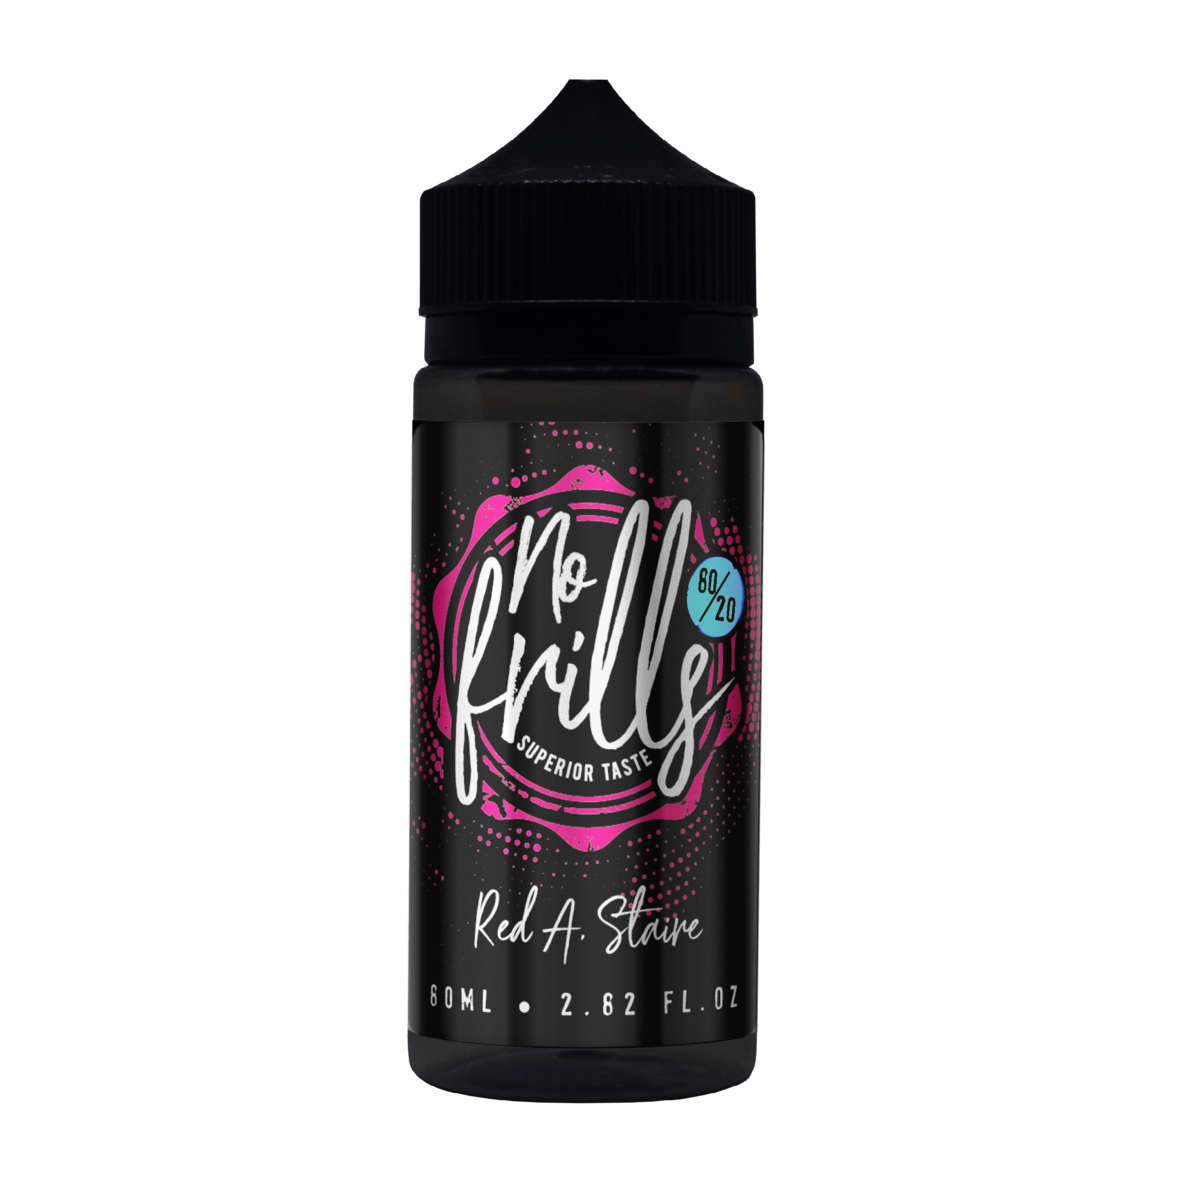 Red A.staire E-liquid by No Frills 80ml Shortfill